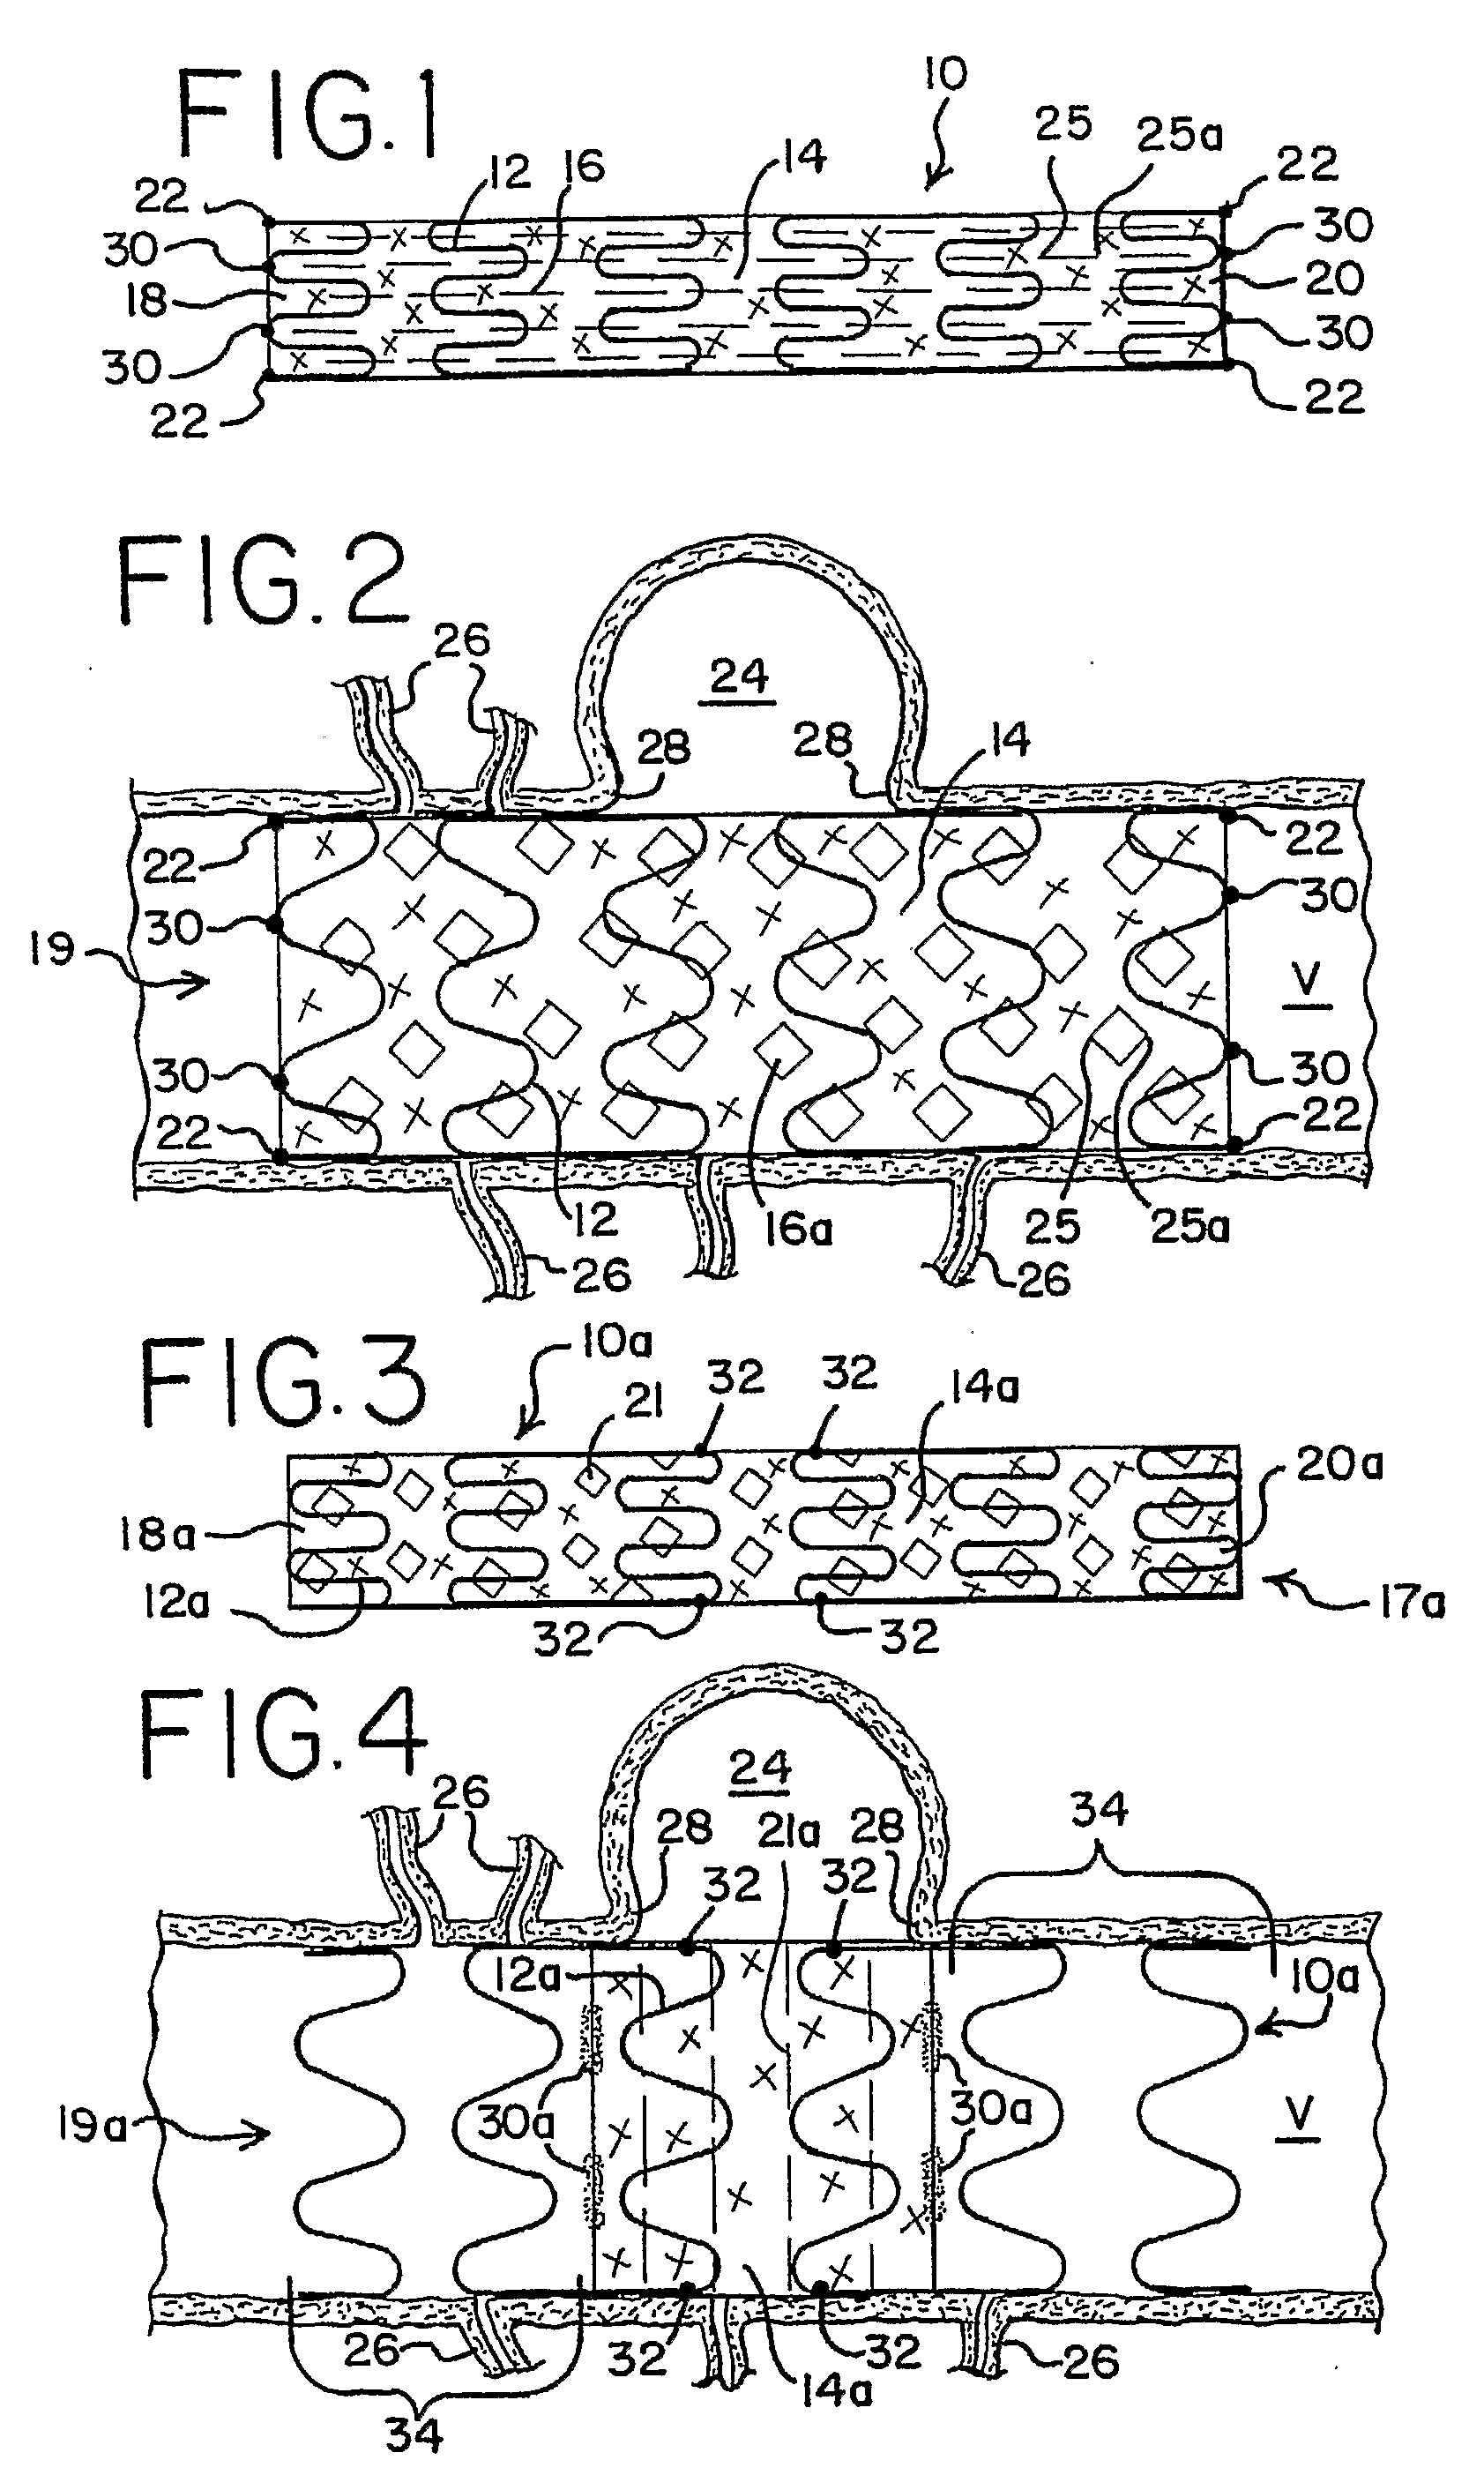 Thin Film Devices for Occlusion of a Vessel